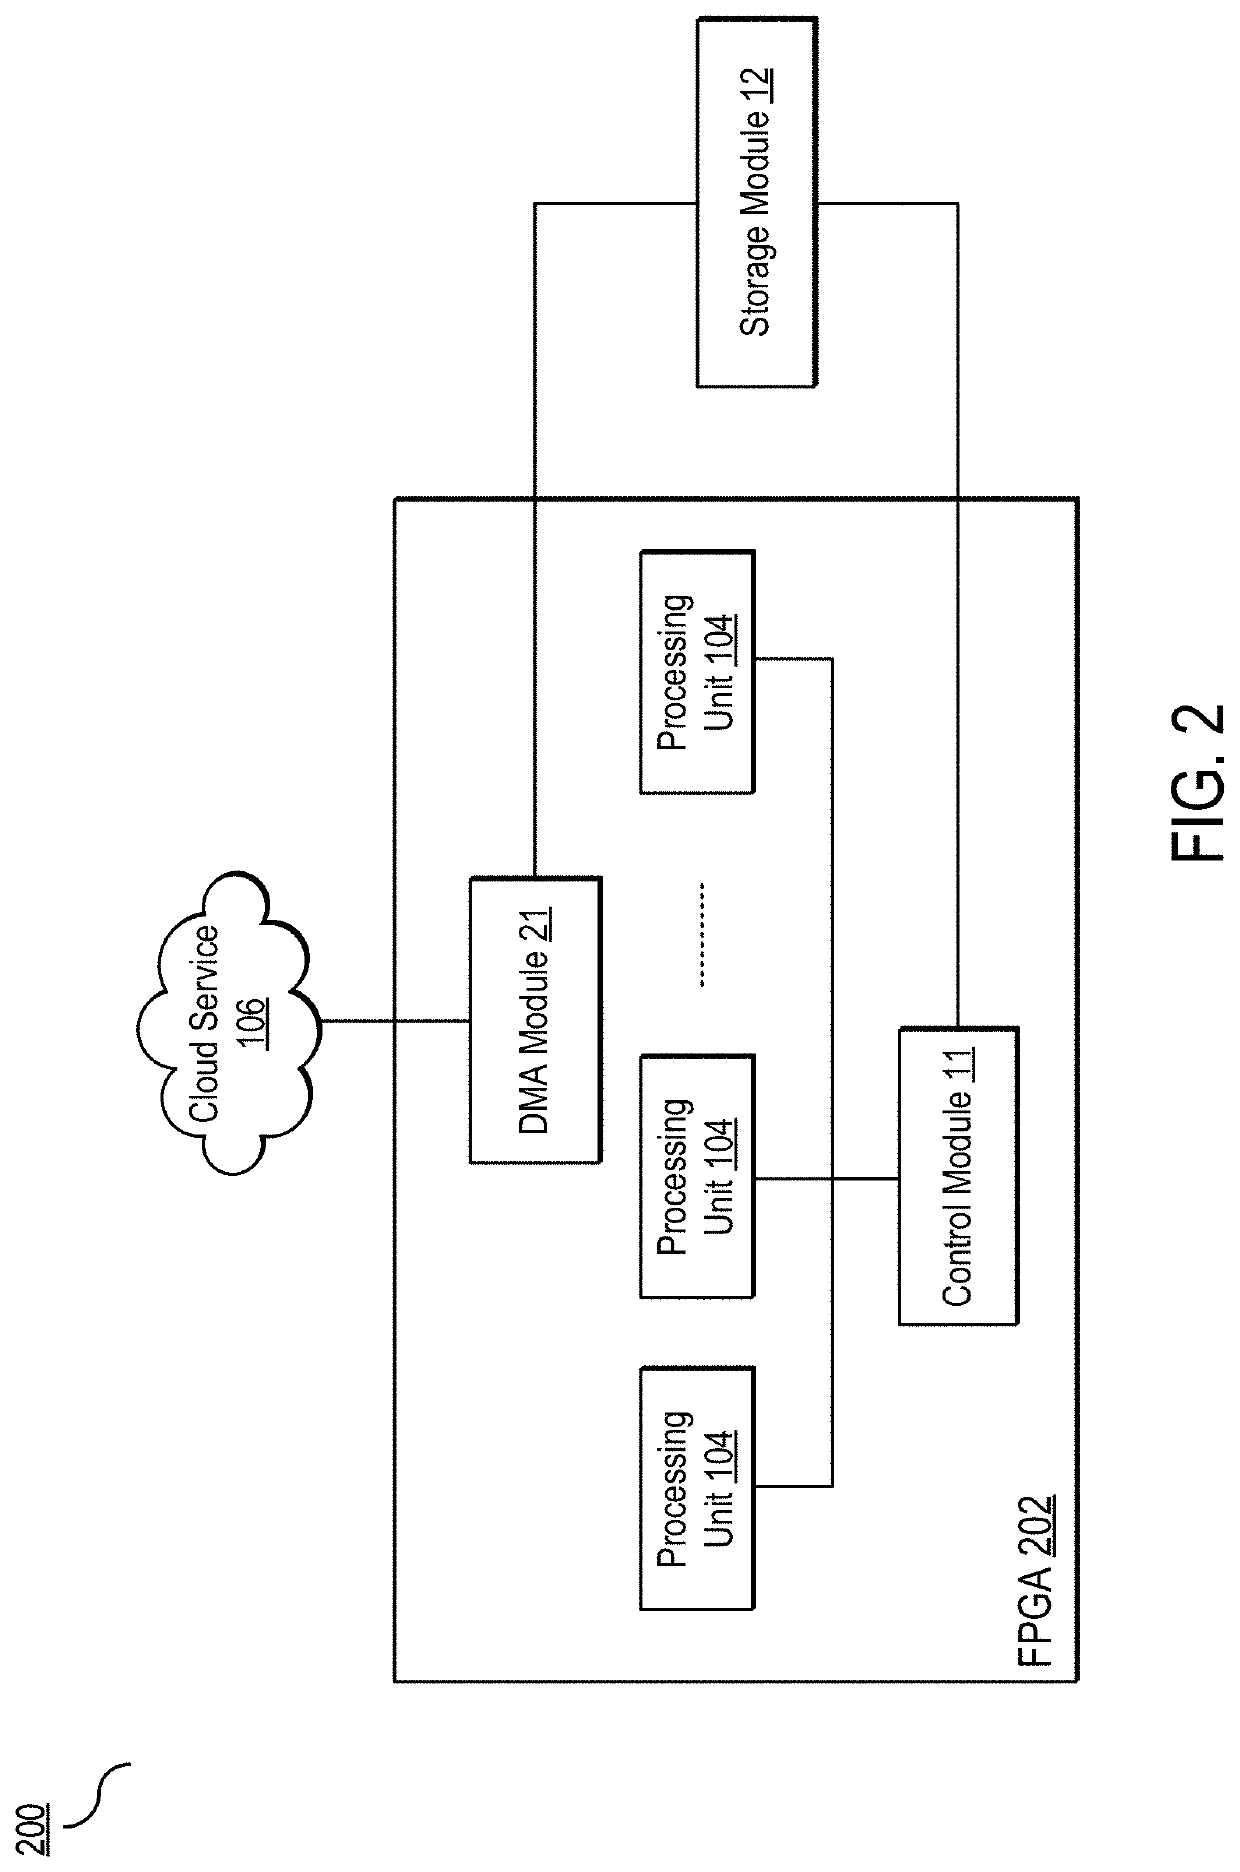 System, method, and electronic device for cloud-based configuration of FPGA configuration data